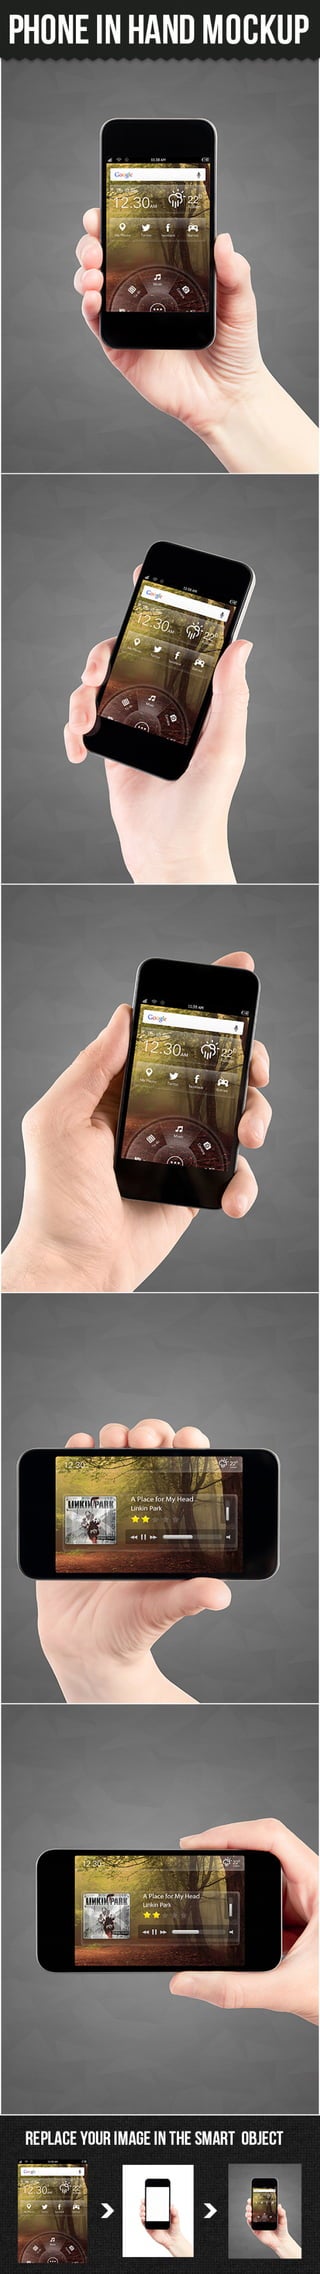 Phone in hand_mock-up (2)